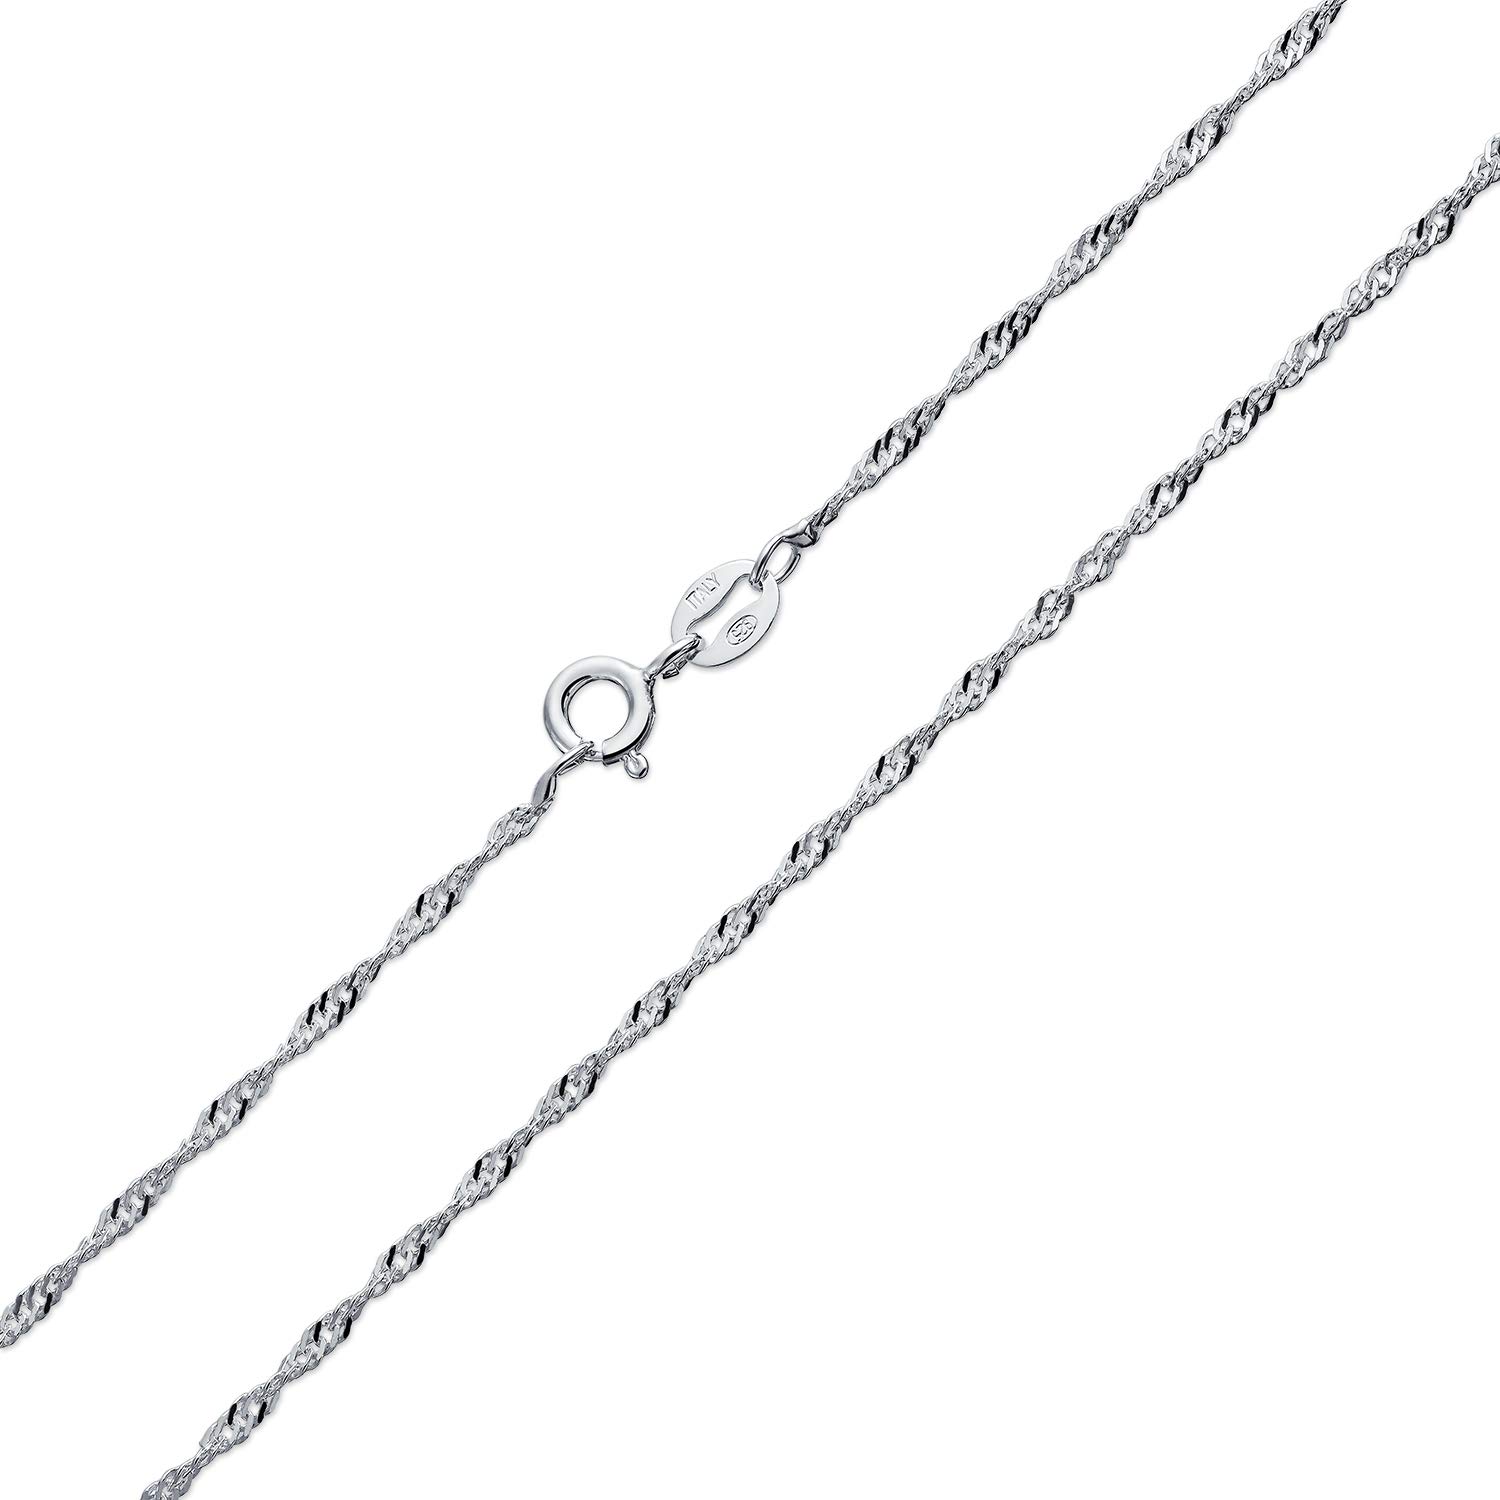 Bling Jewelry Thin 1.5MM Singapore Twist Rope Chain Necklace For Women Rose Gold Plated .925 Sterling Silver Made Italy 14 16 18 20 24 Inch